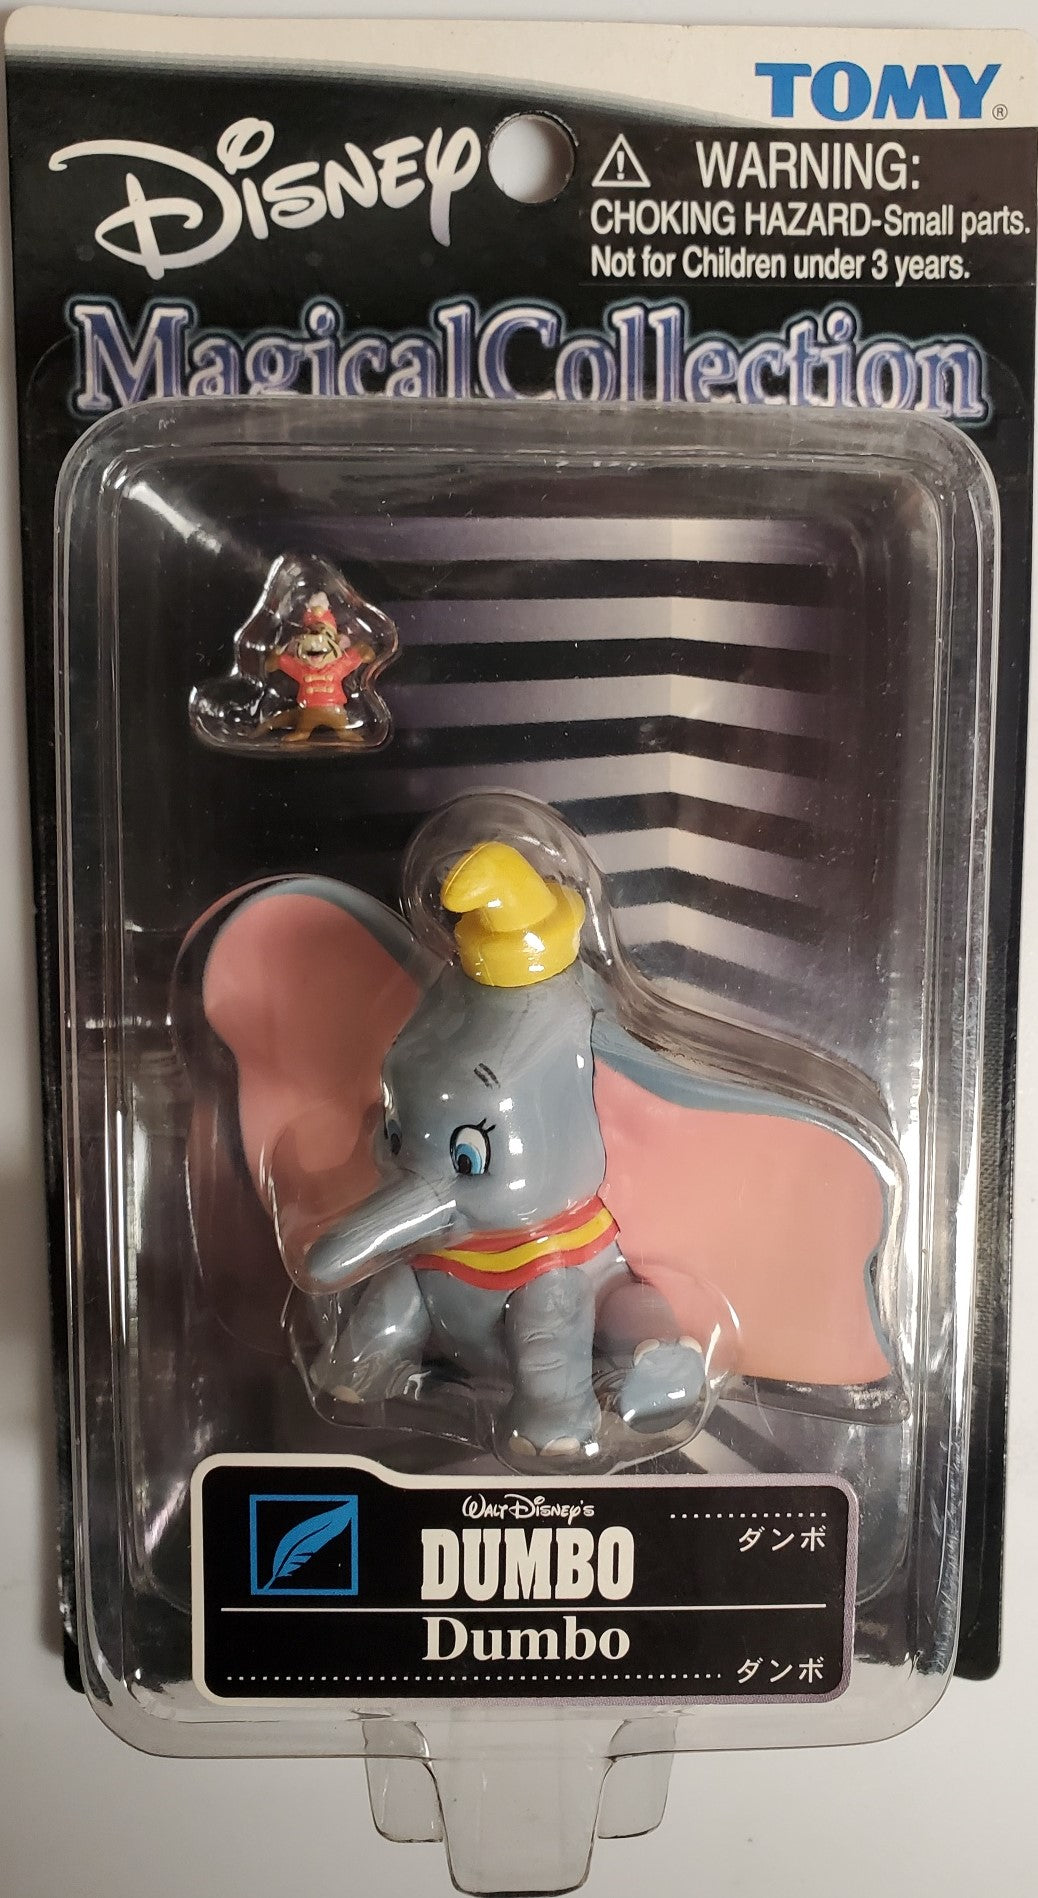 Disney Magical Collection DUMBO action figure